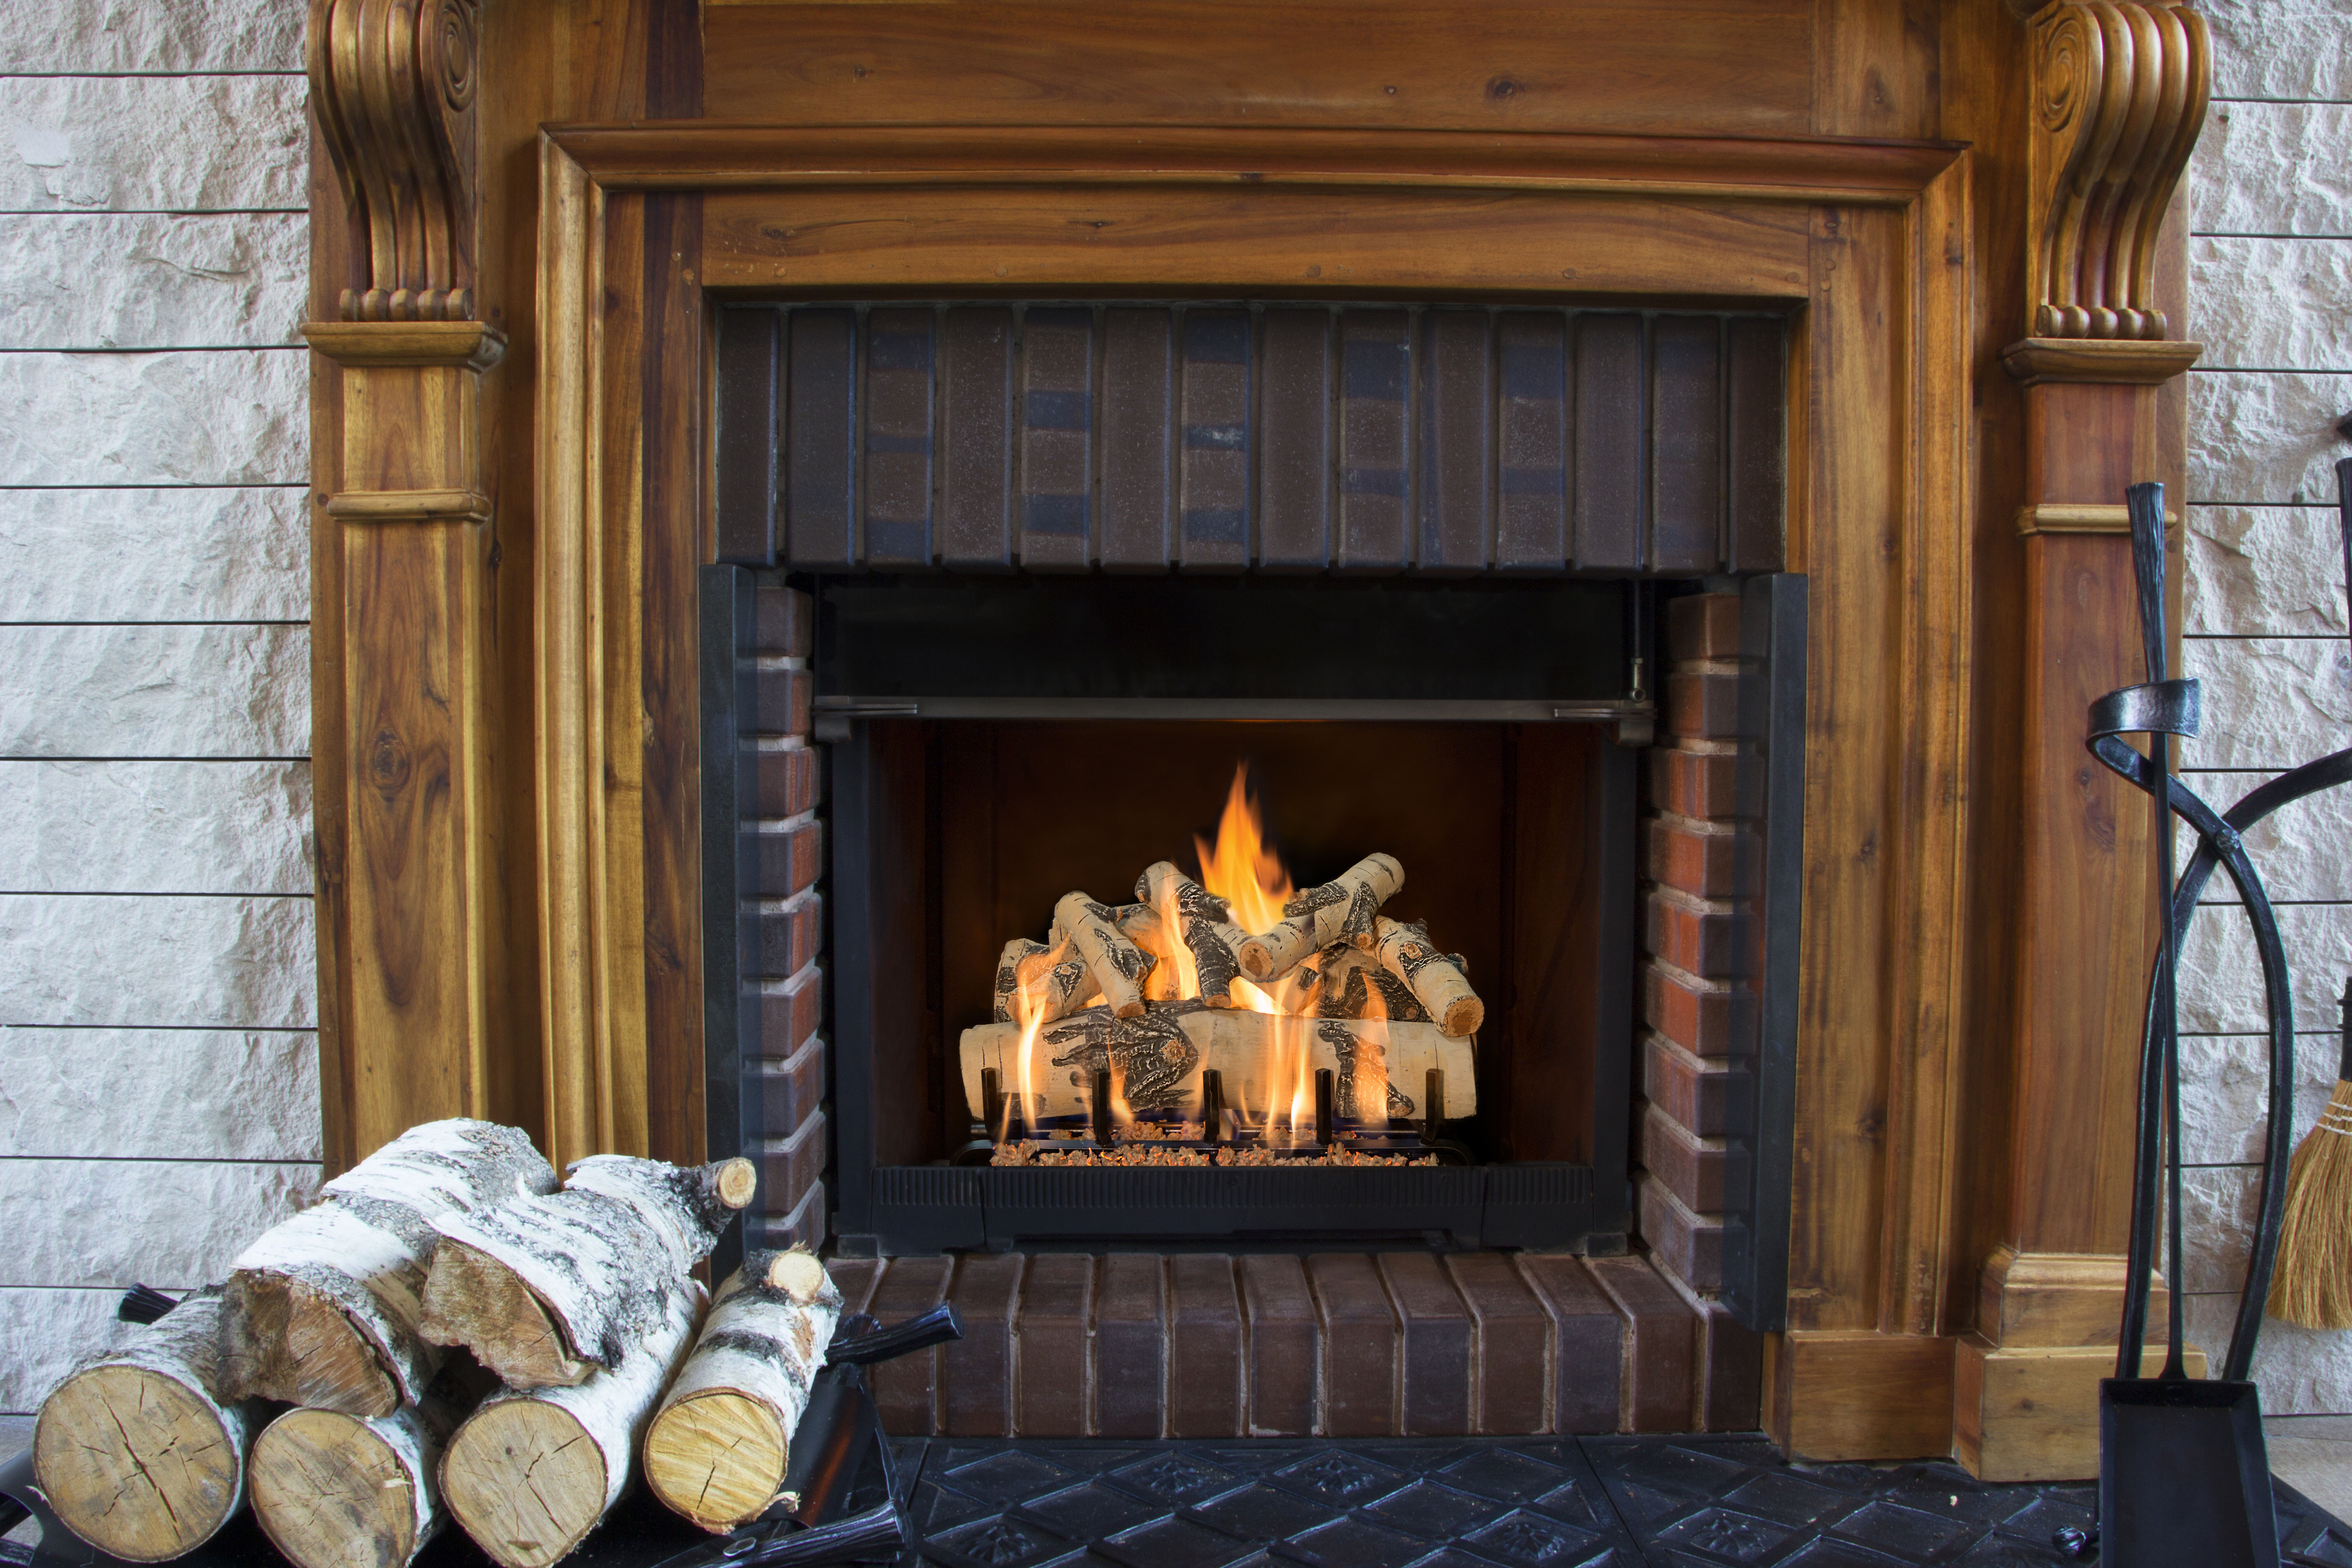 A traditional-looking, masonry hearth with a wooden mantel, a square fireplace, and a Birch wood gas log set.